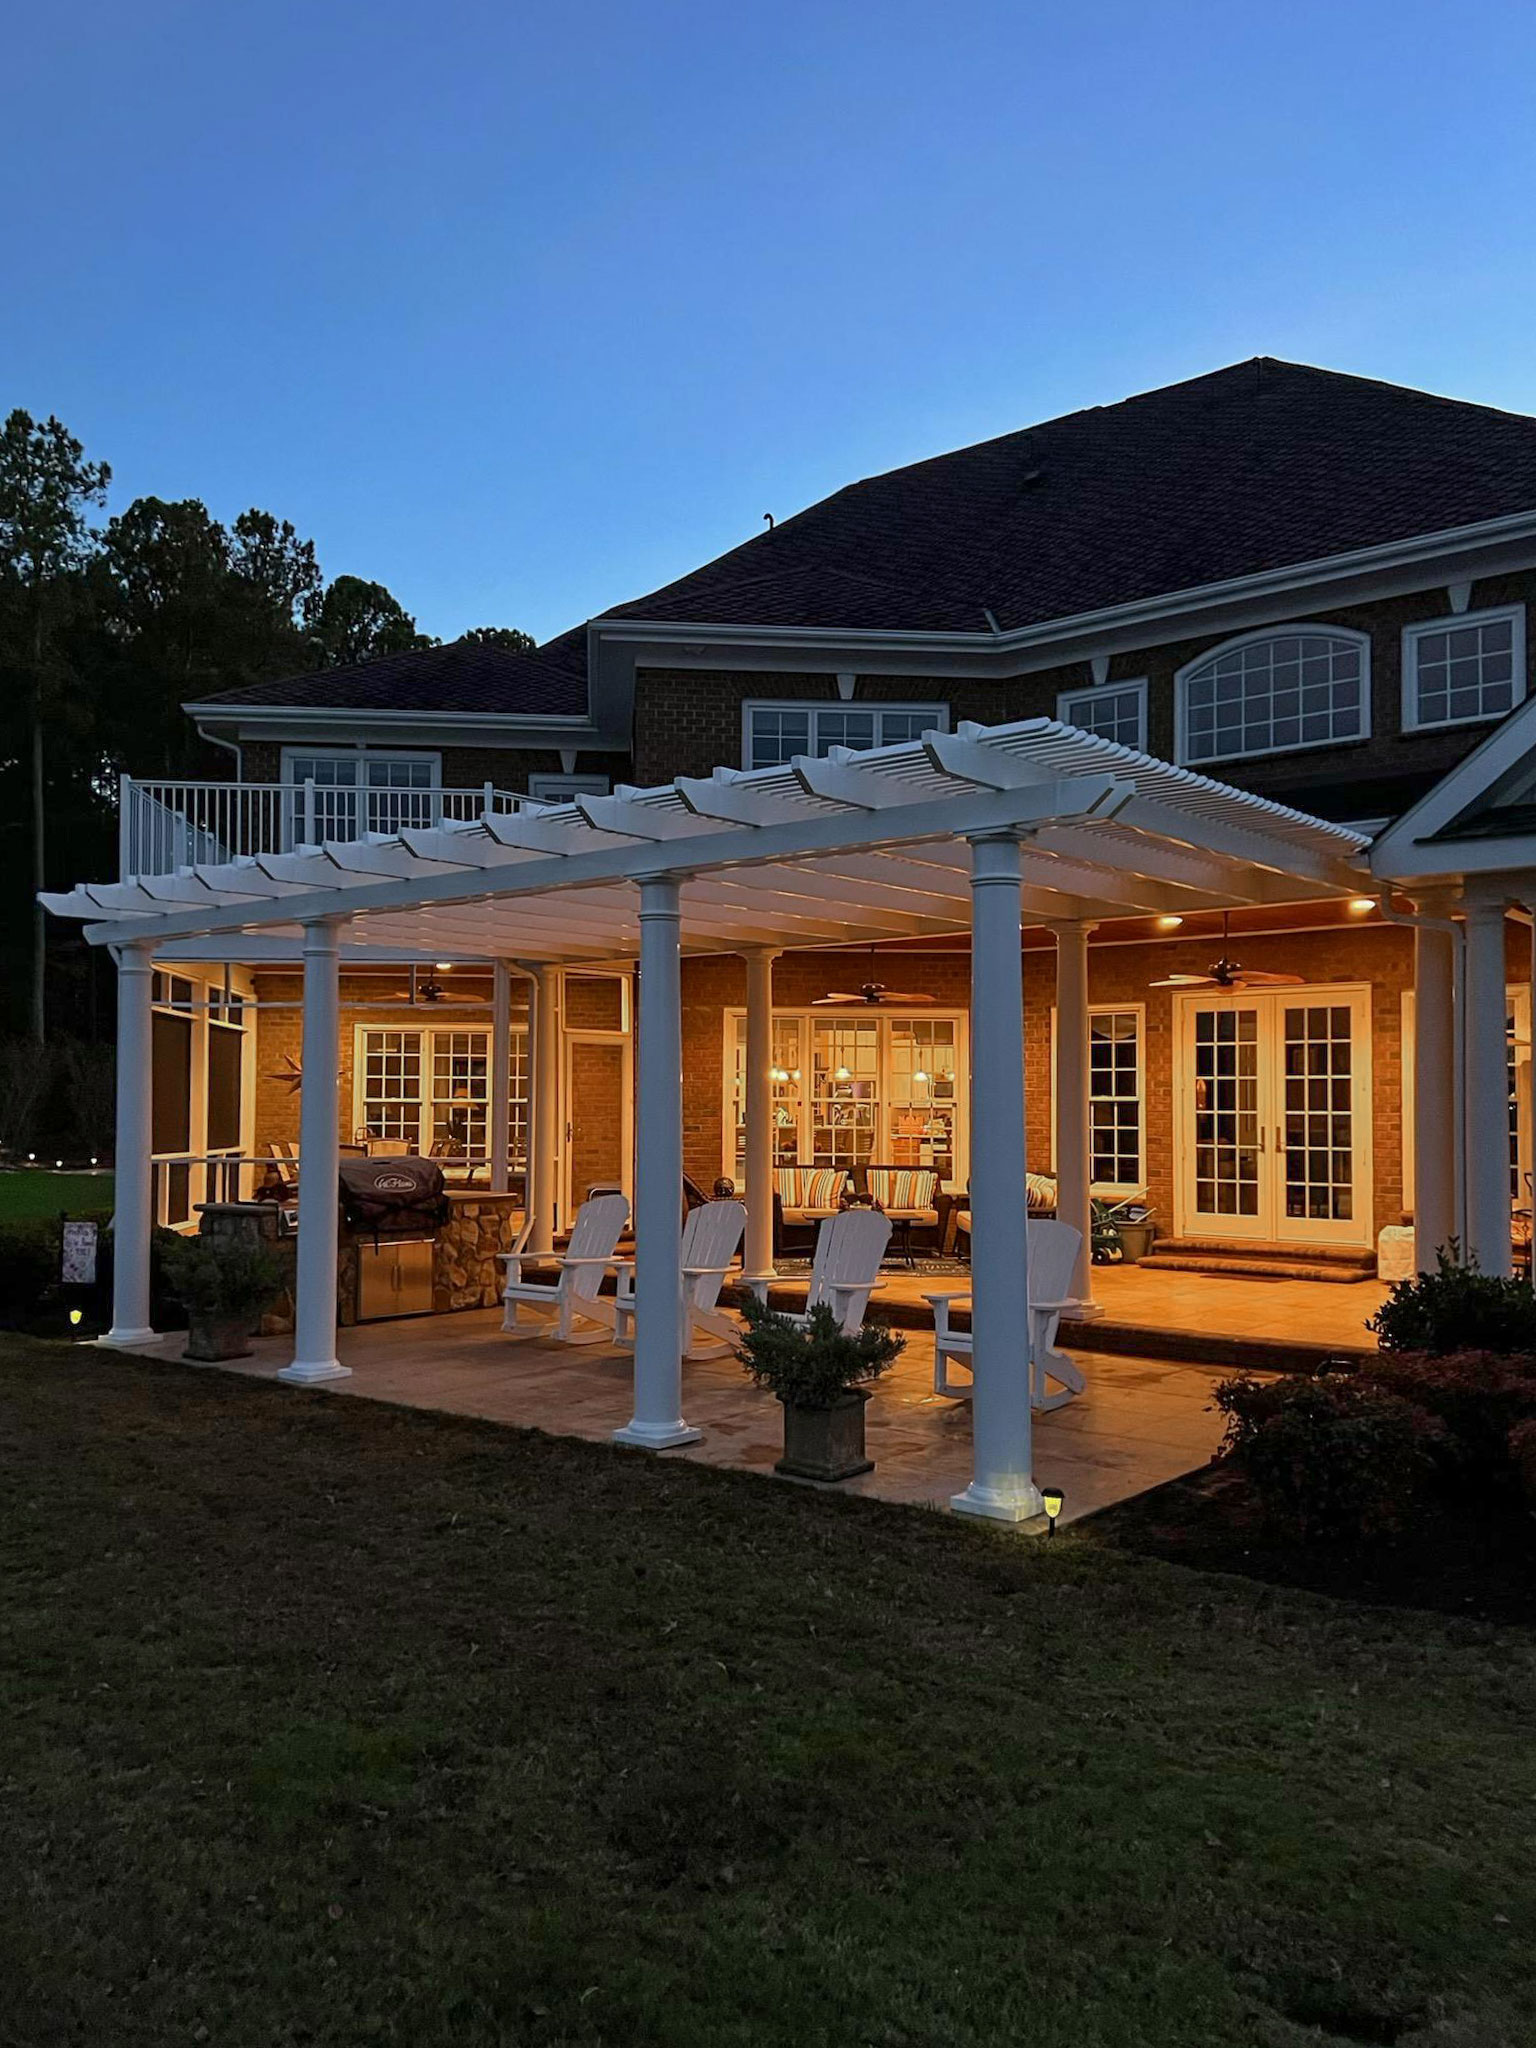 Large white traditional pergola with round post columns on a large traditional brick home at night